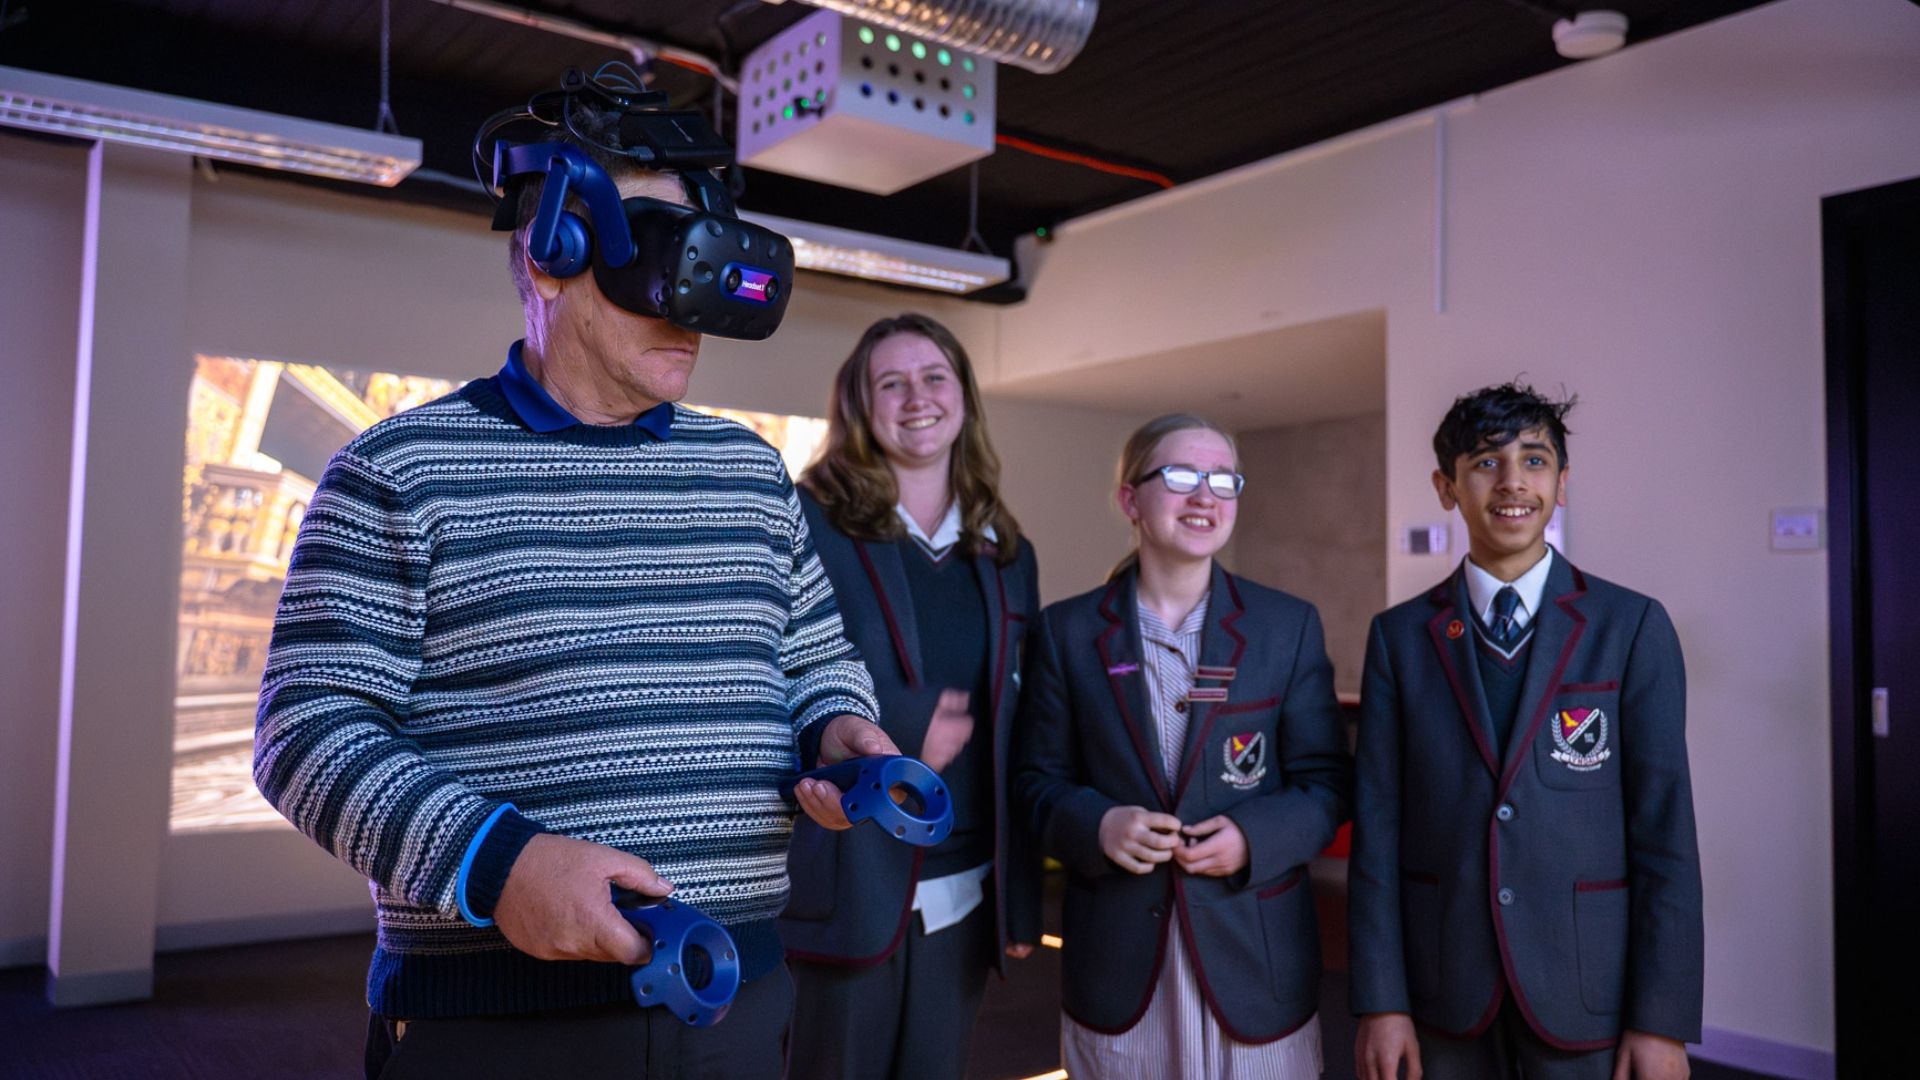 Students are teaching others inside a Lumination Learning Lab in Melbourne.